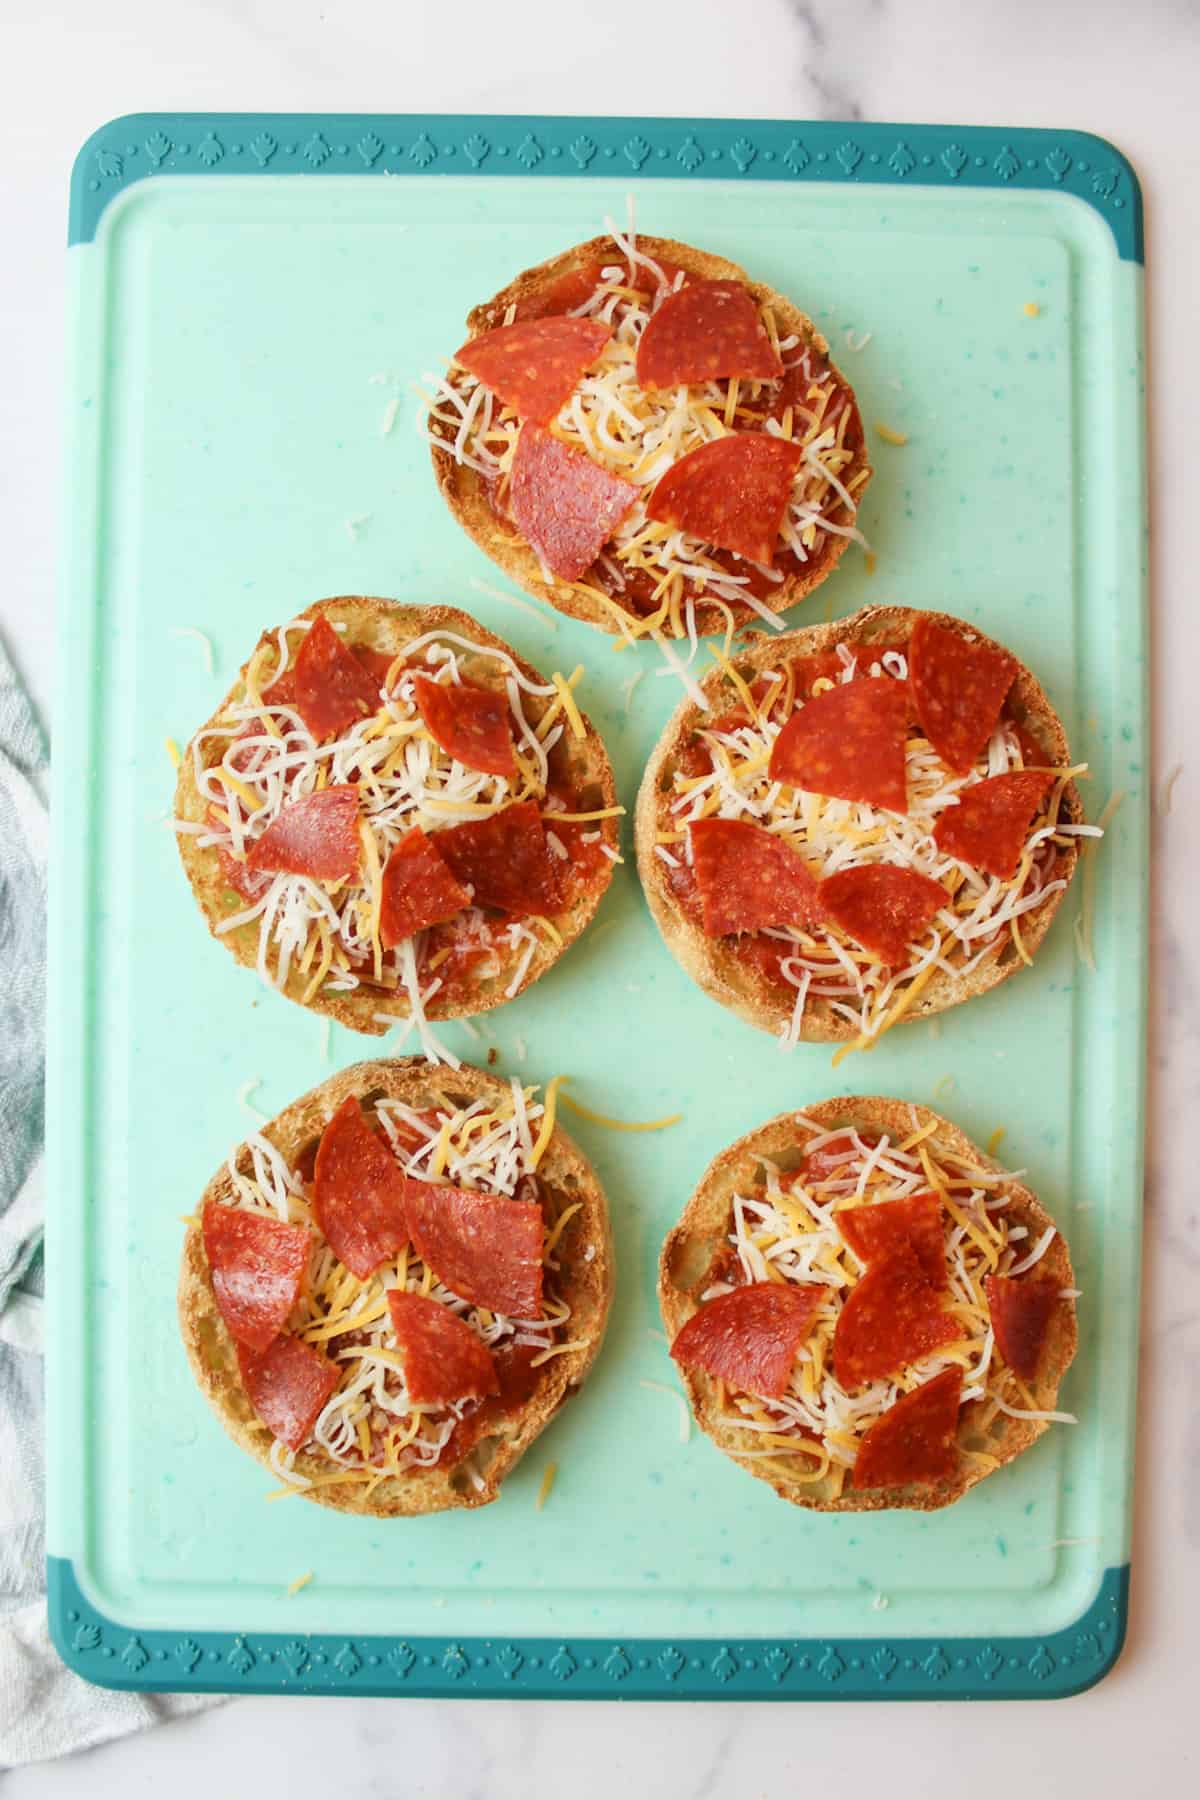 assembled and unbaked english muffin pizzas on a cutting board